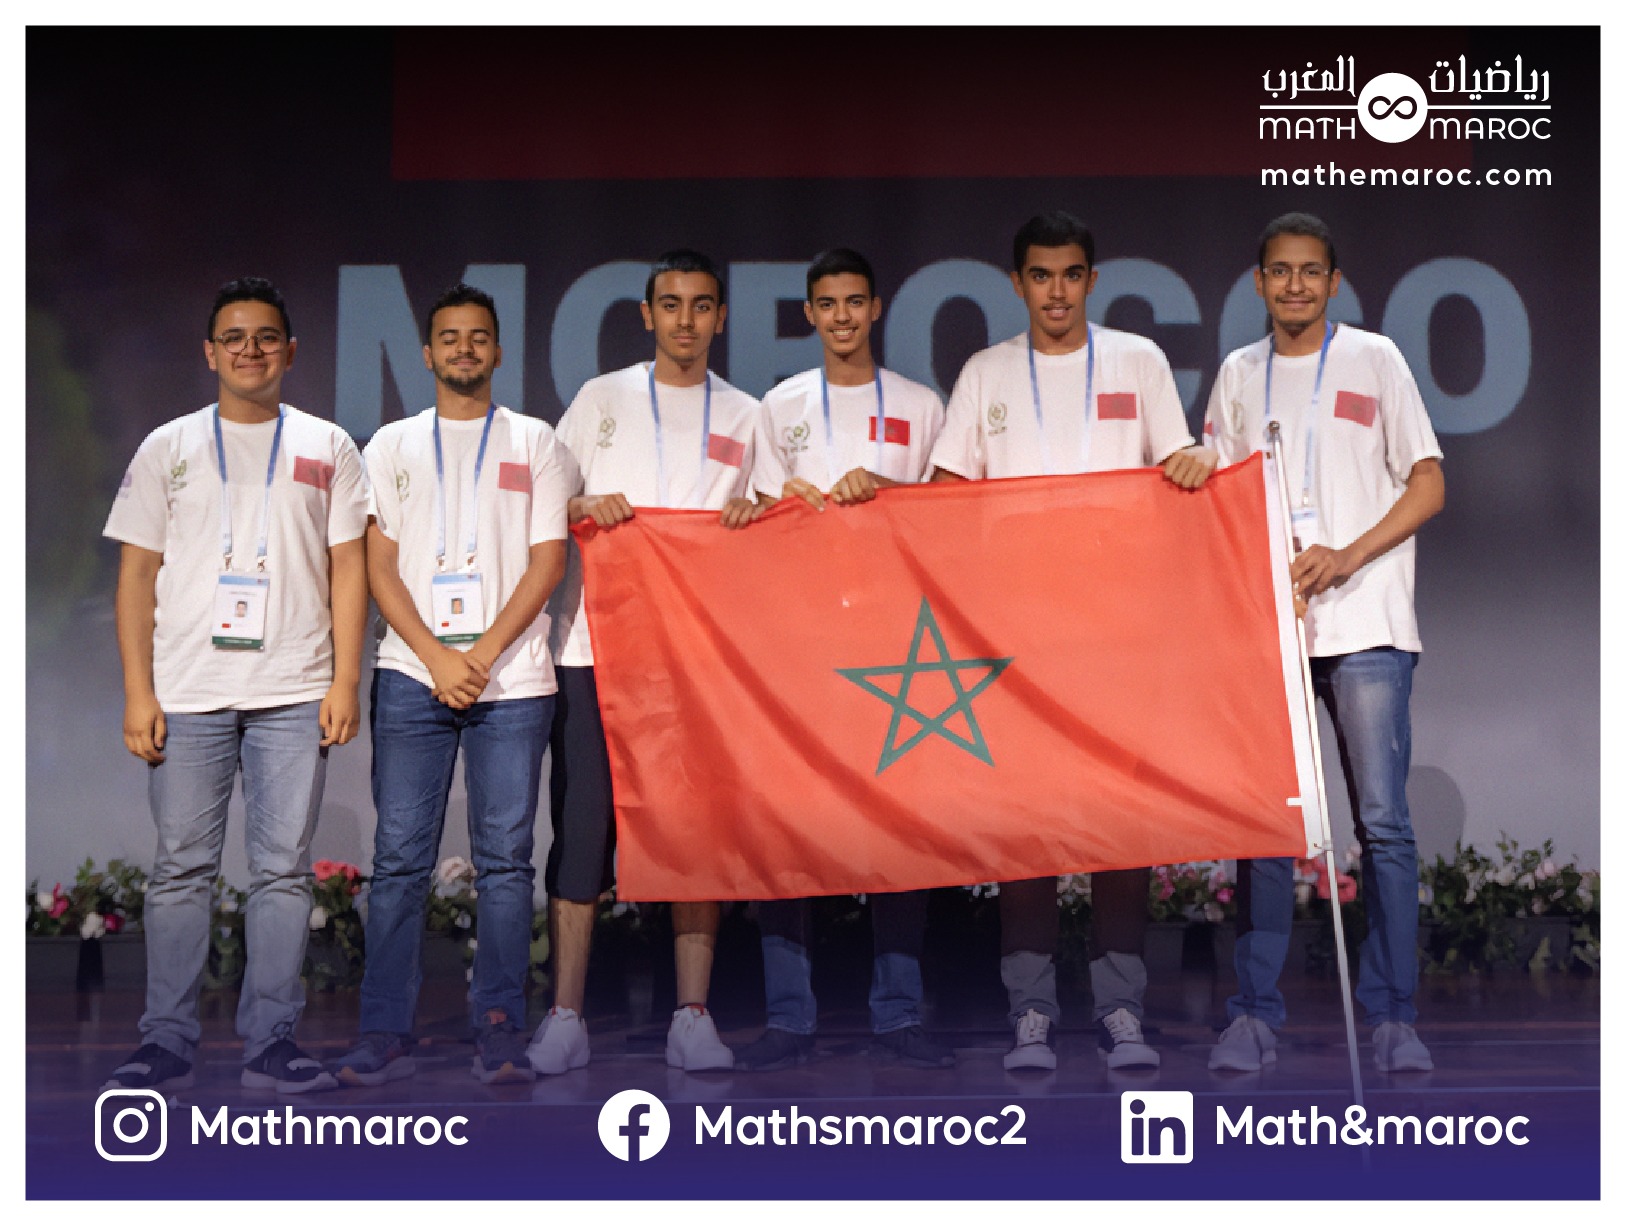 The Moroccan national team got fours honourable mentions in IMO!